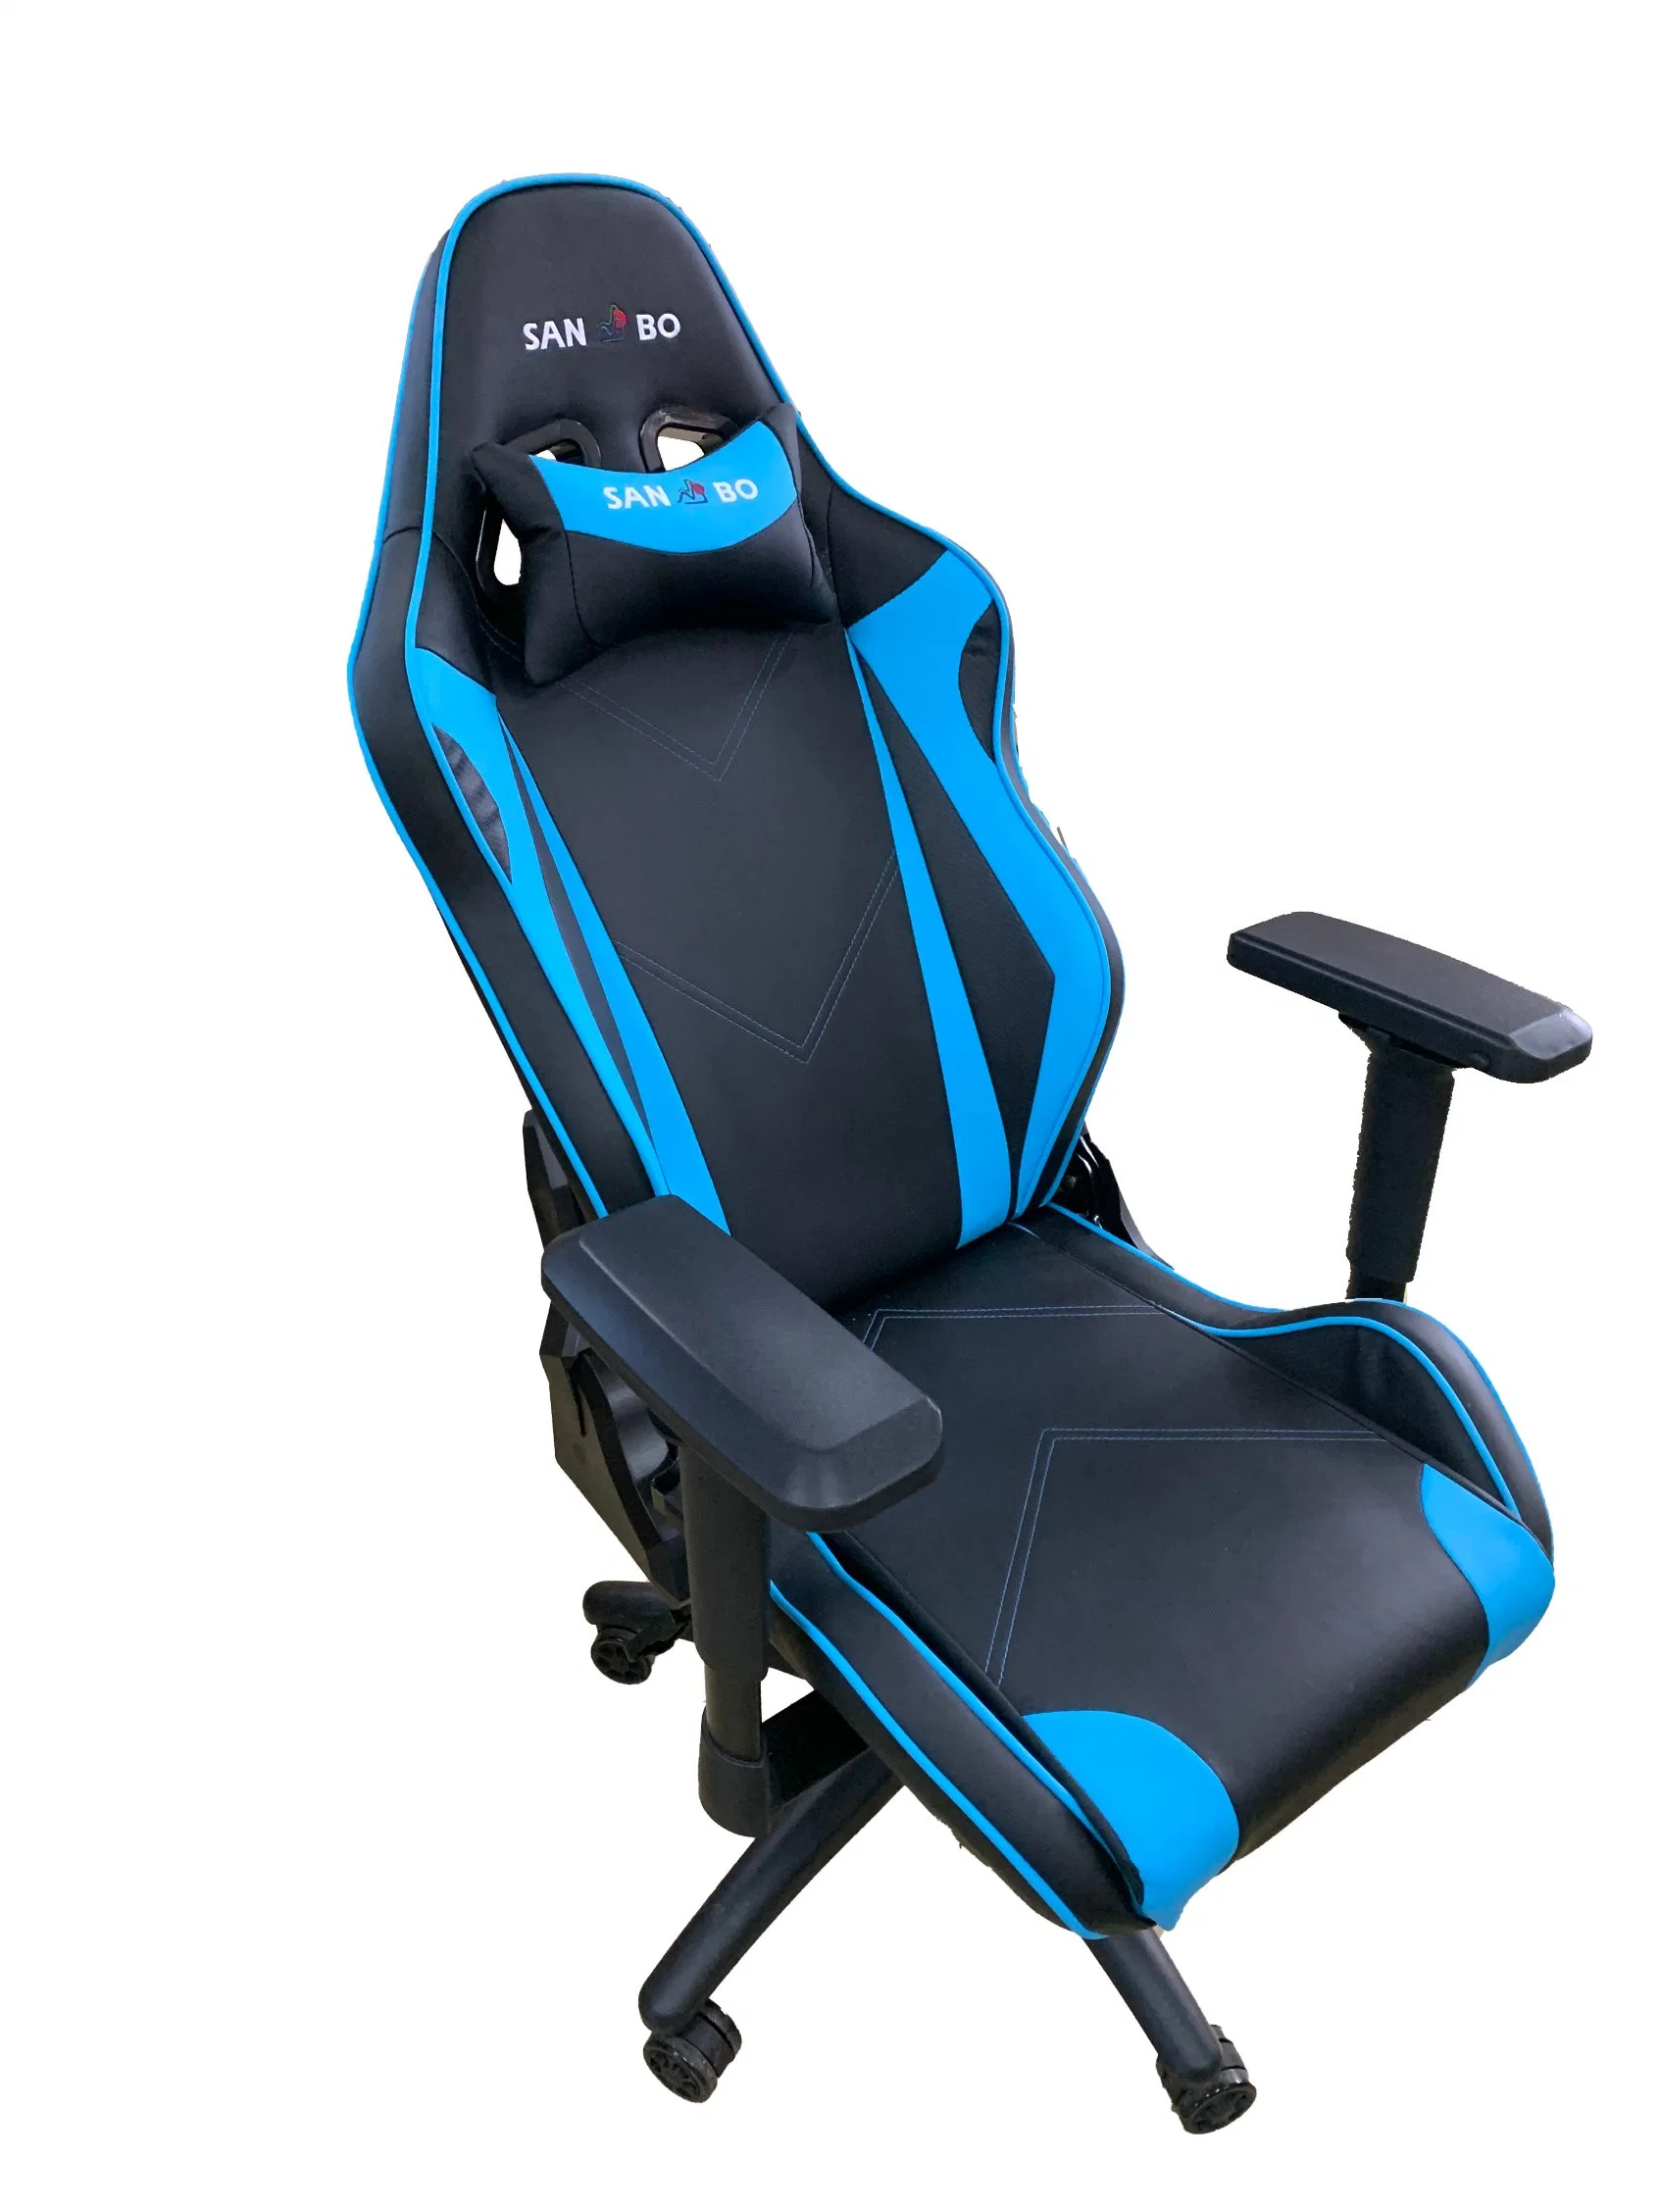 Brand New Low Price 360 Degree Swivel Adjustable Gaming Chair Office Chairs for Play Computer Game, Office